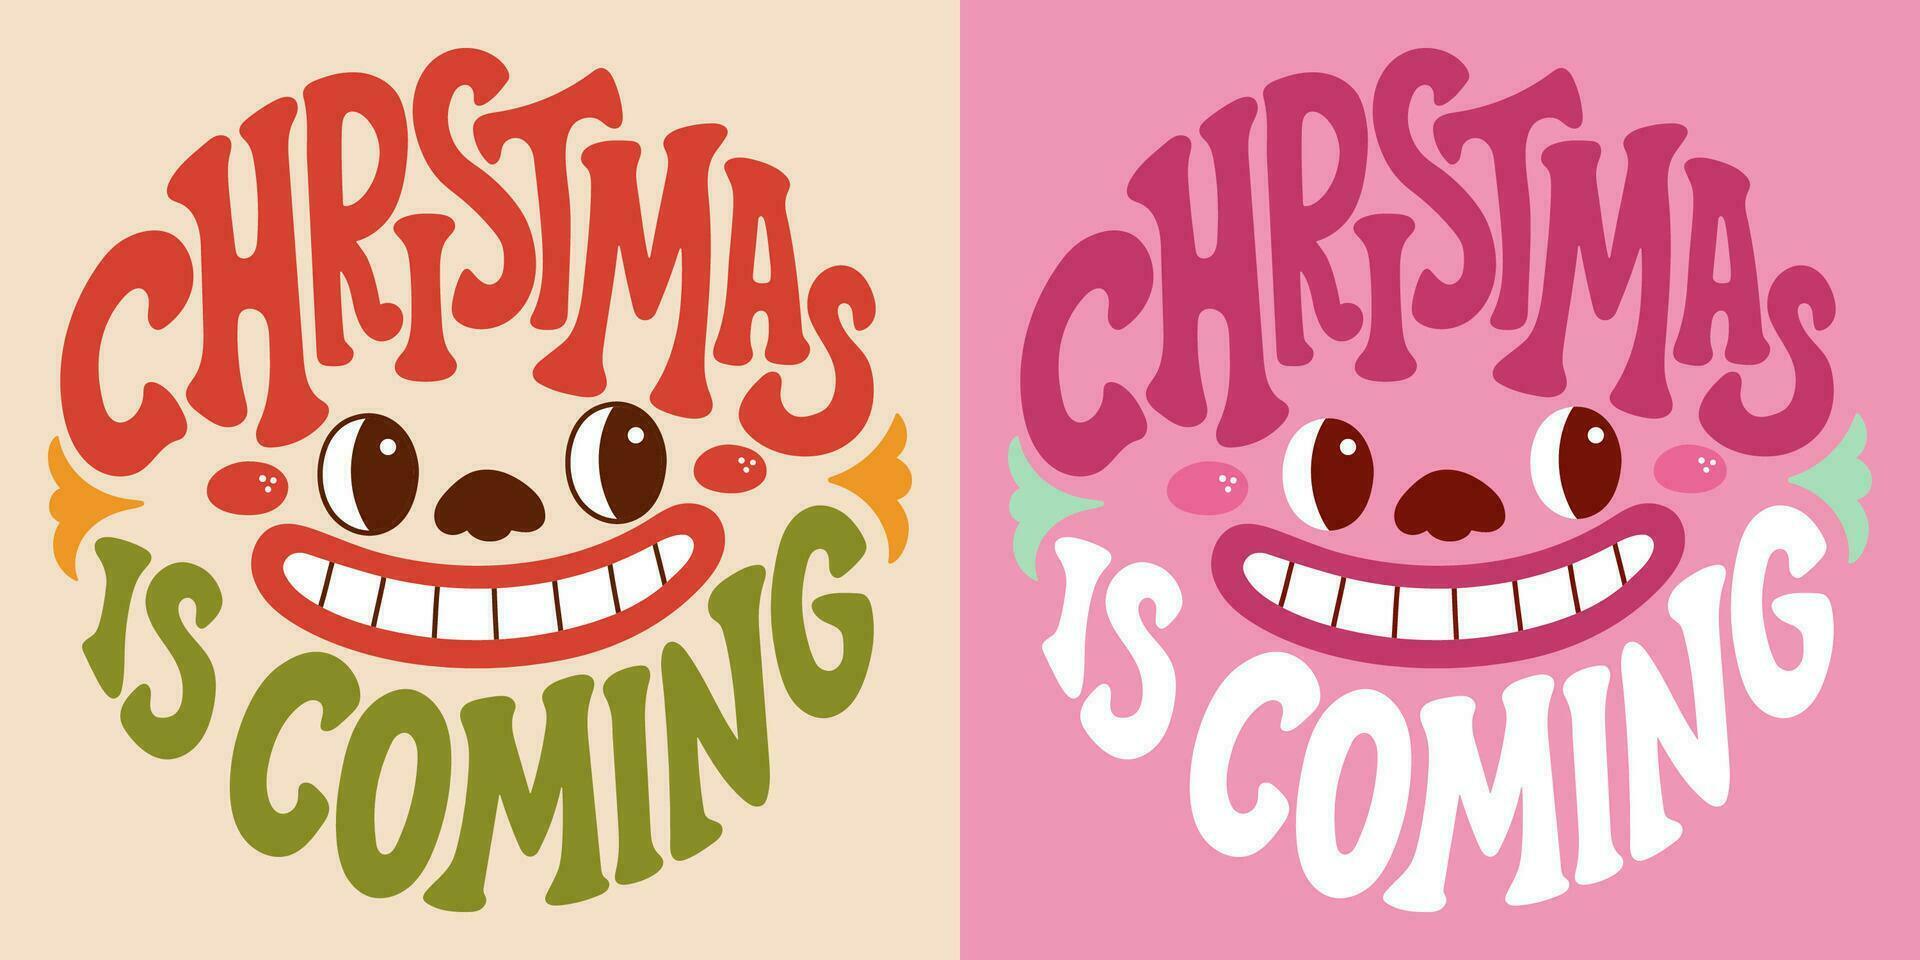 Groovy lettering Christmas is coming. Retro slogan in round shape. Trendy groovy print design for posters, cards, tshirts in style 60s, 70s. Vector illustration.